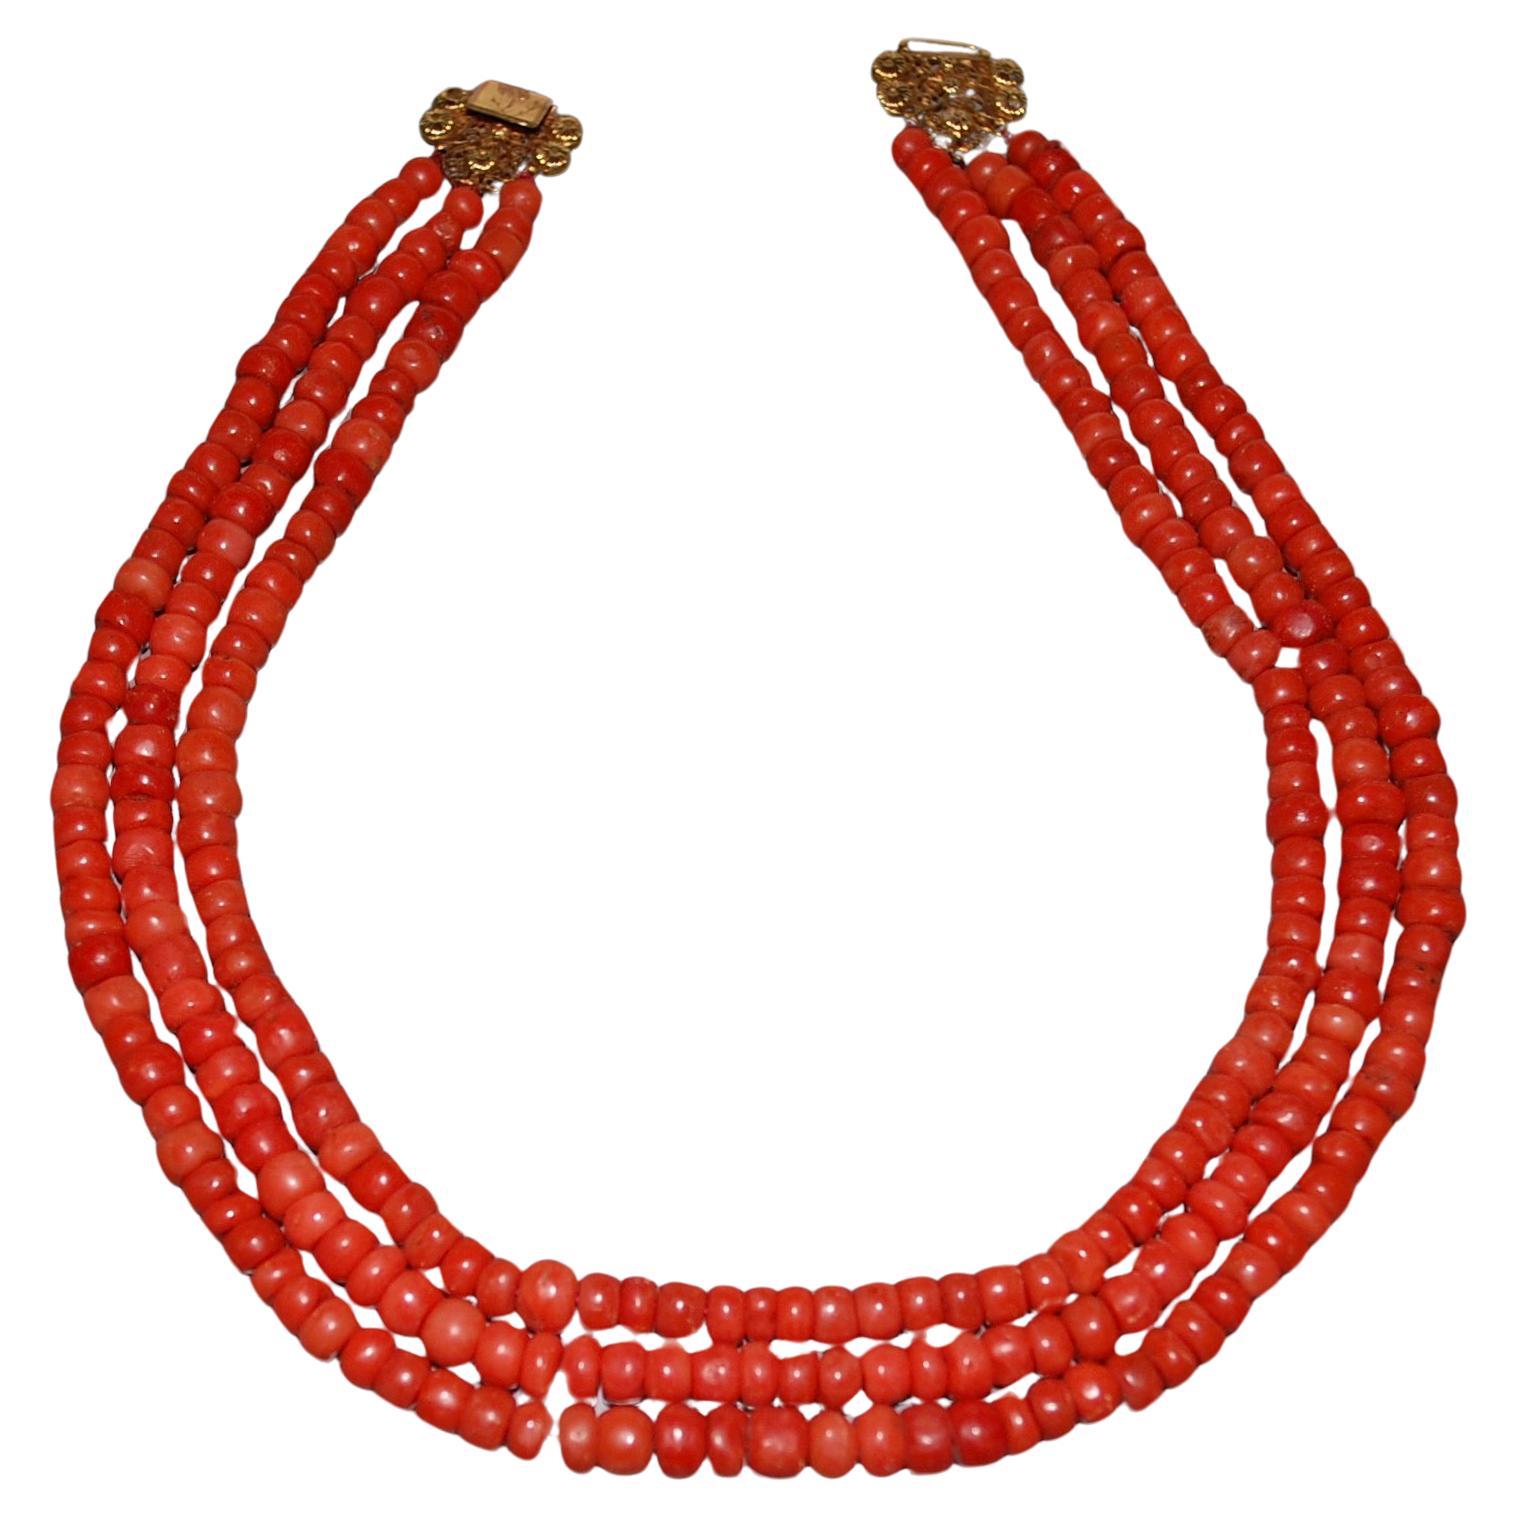 A Three Strand Red Coral Necklace Gold Clasp 